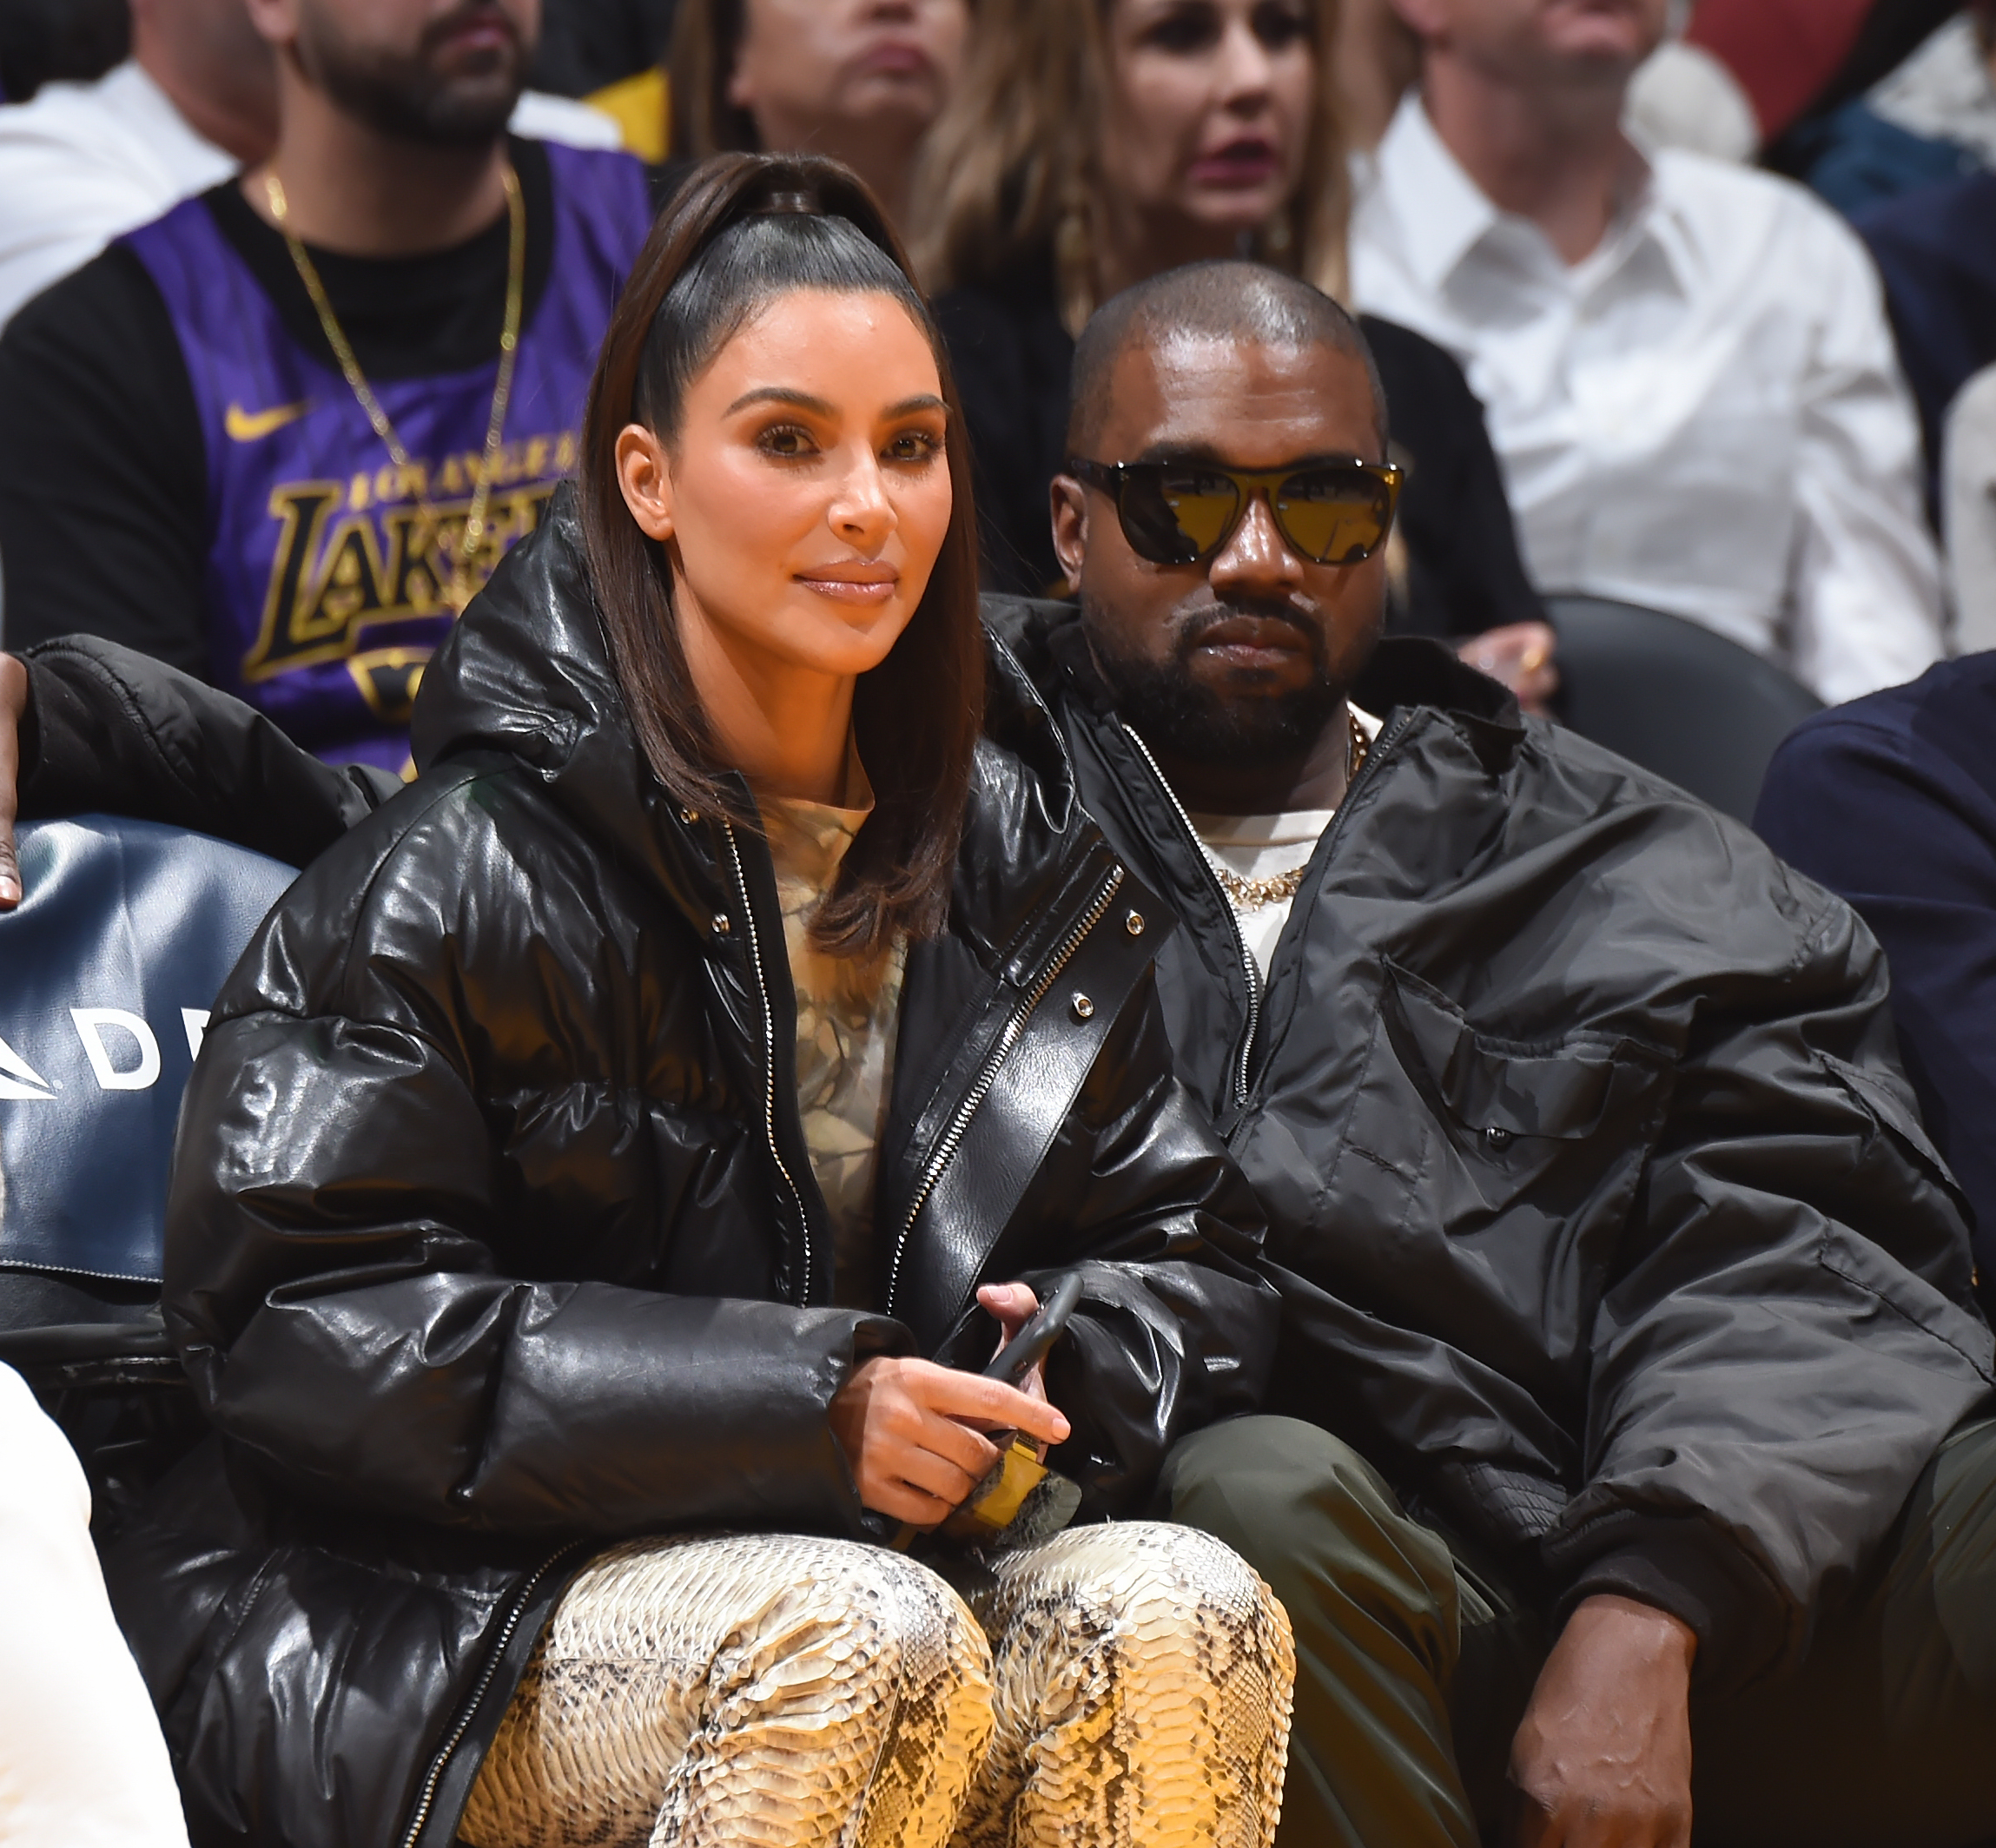 Close-up of Kim and Ye sitting together in an audience